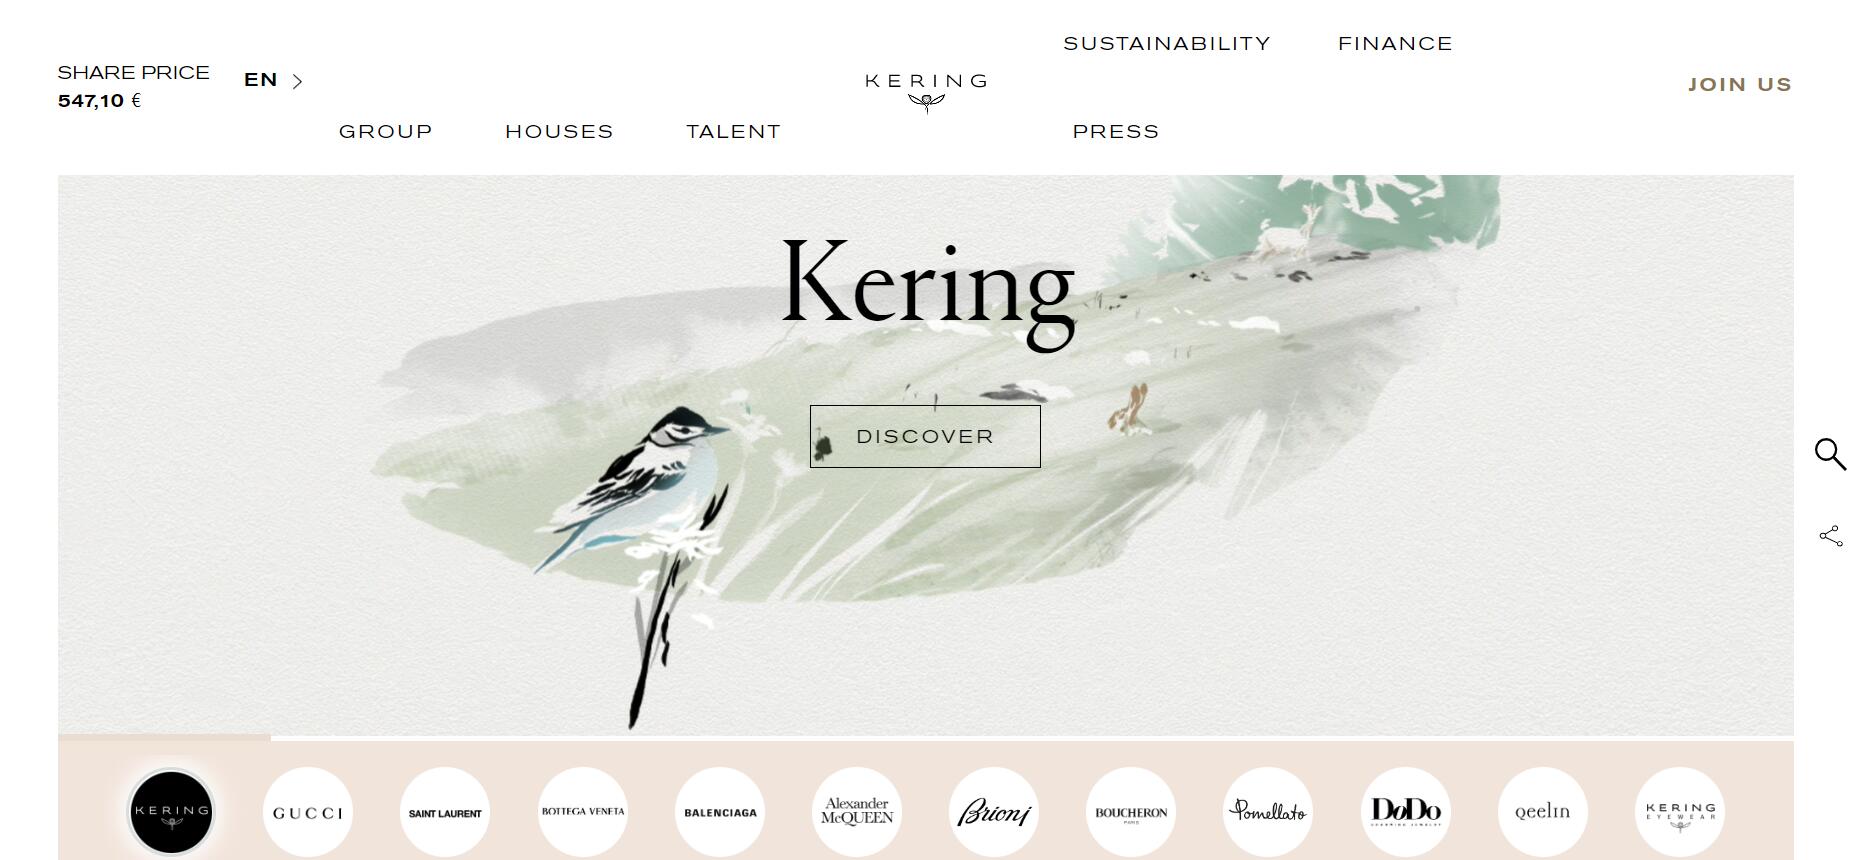 Kering Commits to Reducing Absolute Greenhouse Gas Emissions by 40% By 2035